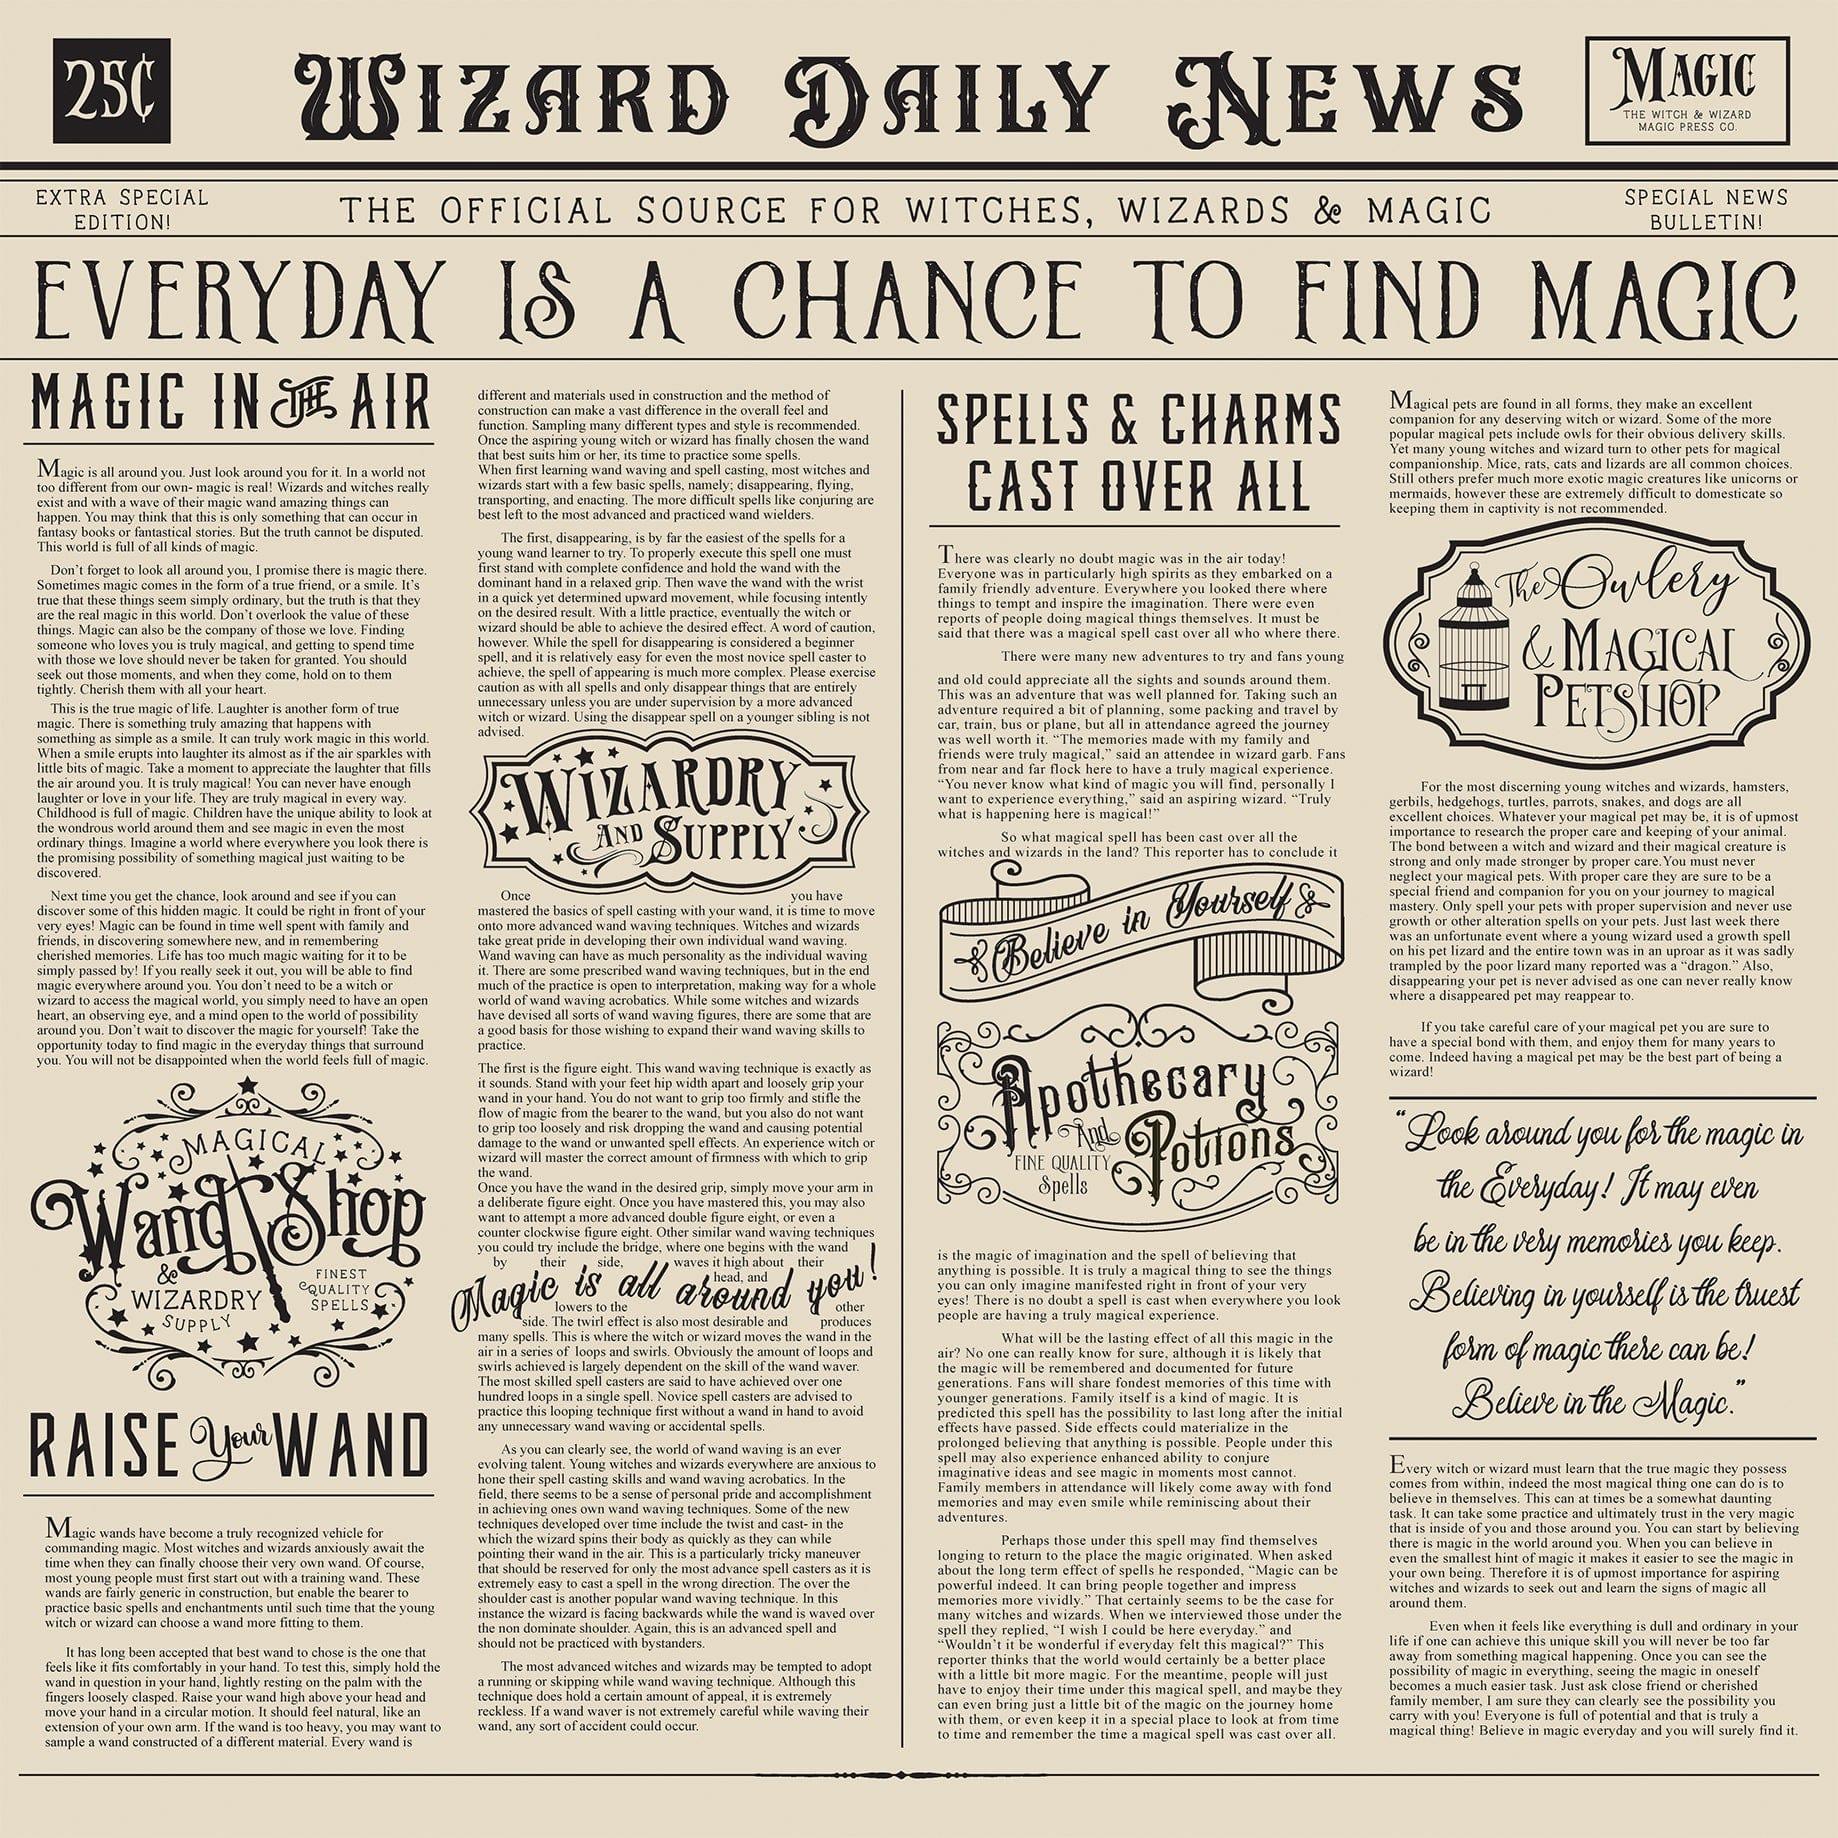 Witches & Wizards No. 2 Collection Wizards Daily News 12 x 12 Double-Sided Scrapbook Paper by Echo Park Paper - Scrapbook Supply Companies